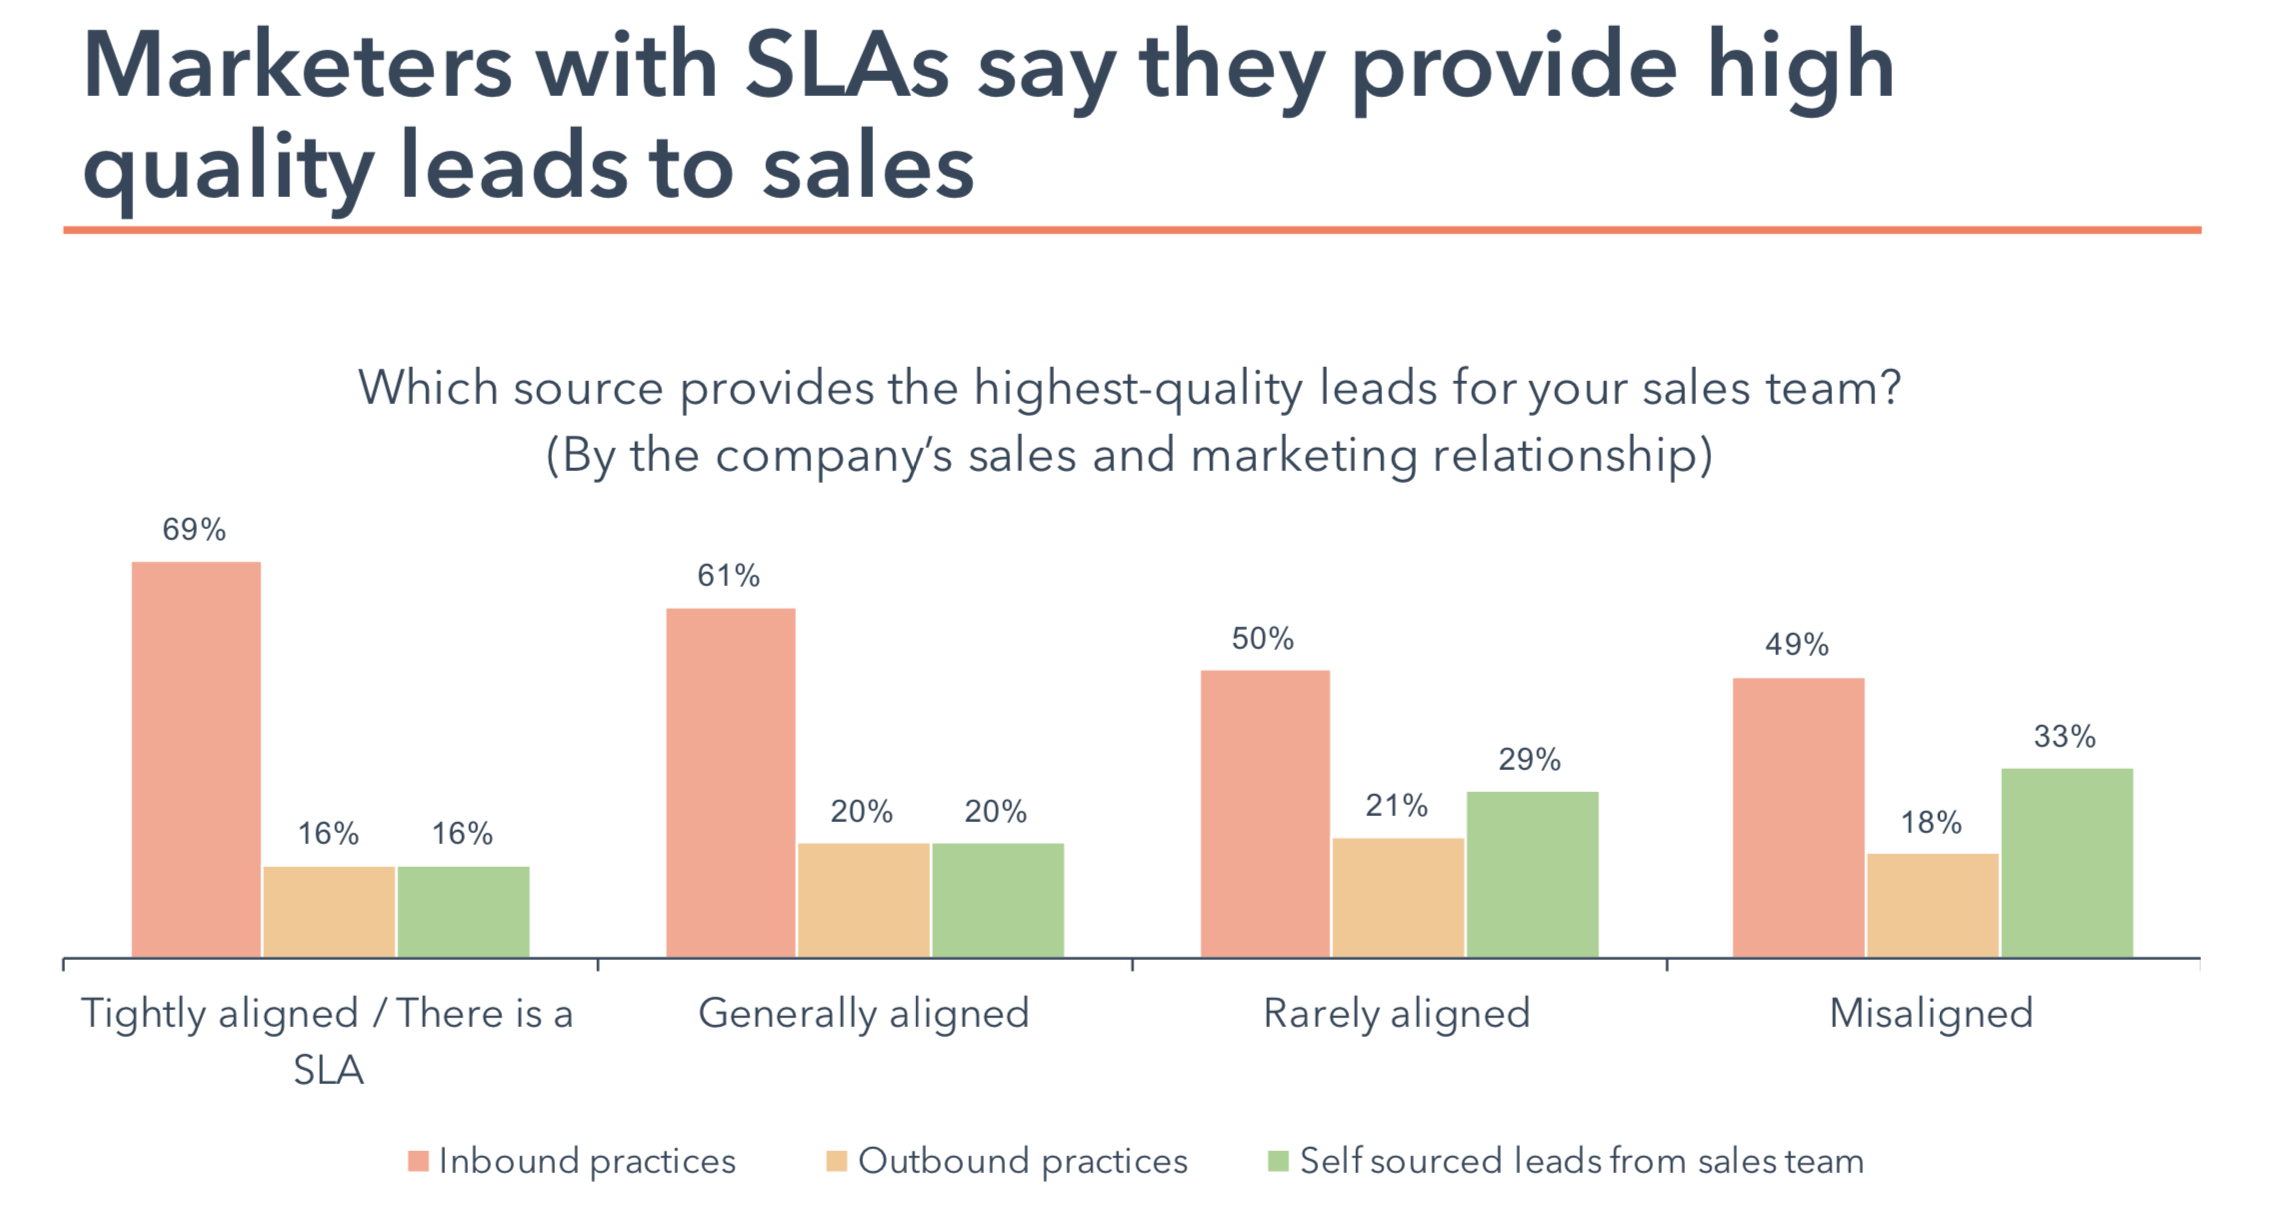 Marketers with SLAs say they provide high quality leads to sales